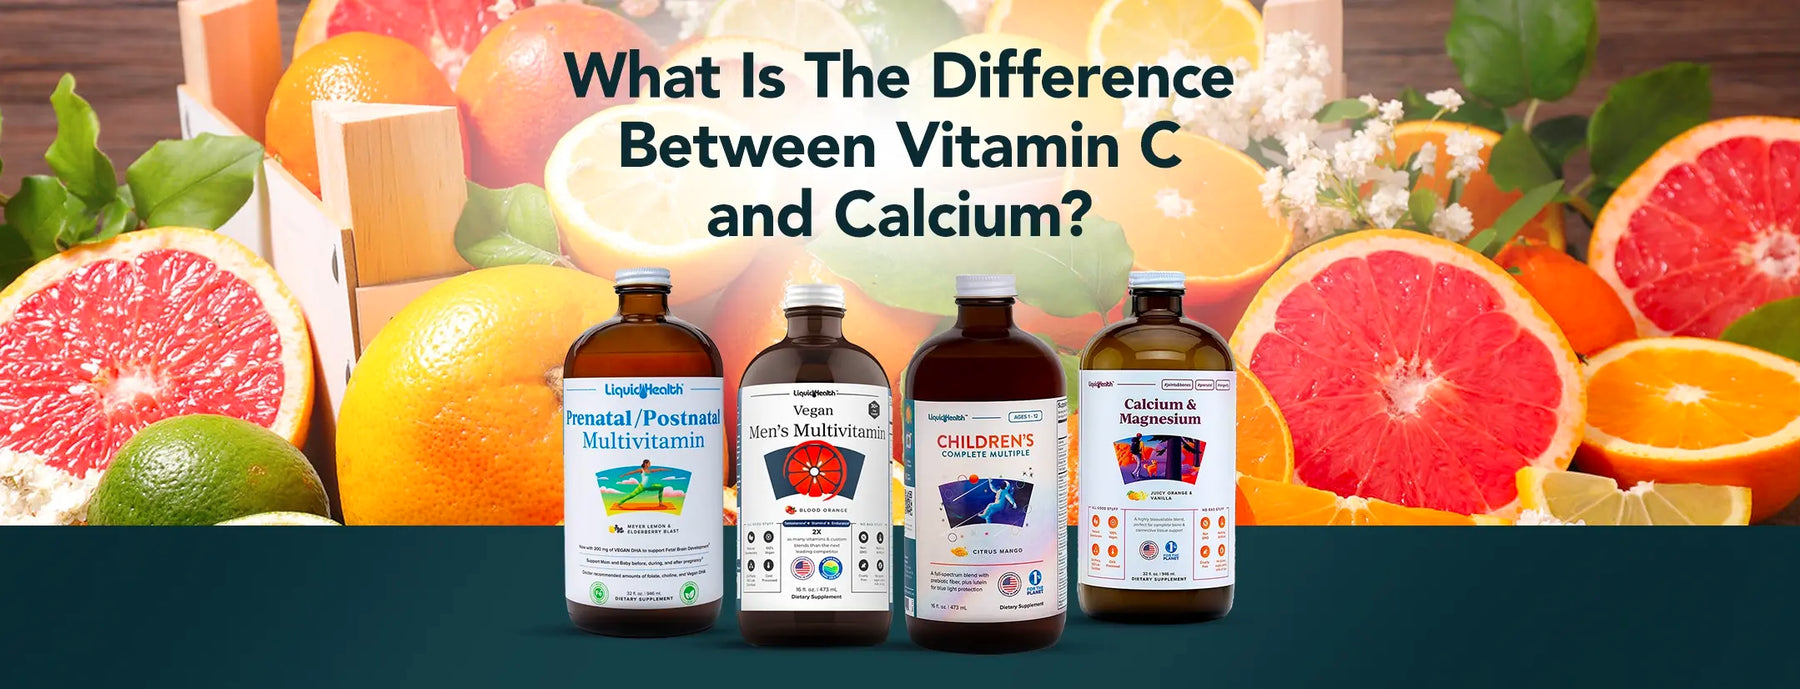 What Is The Difference Between Vitamin C and Calcium?